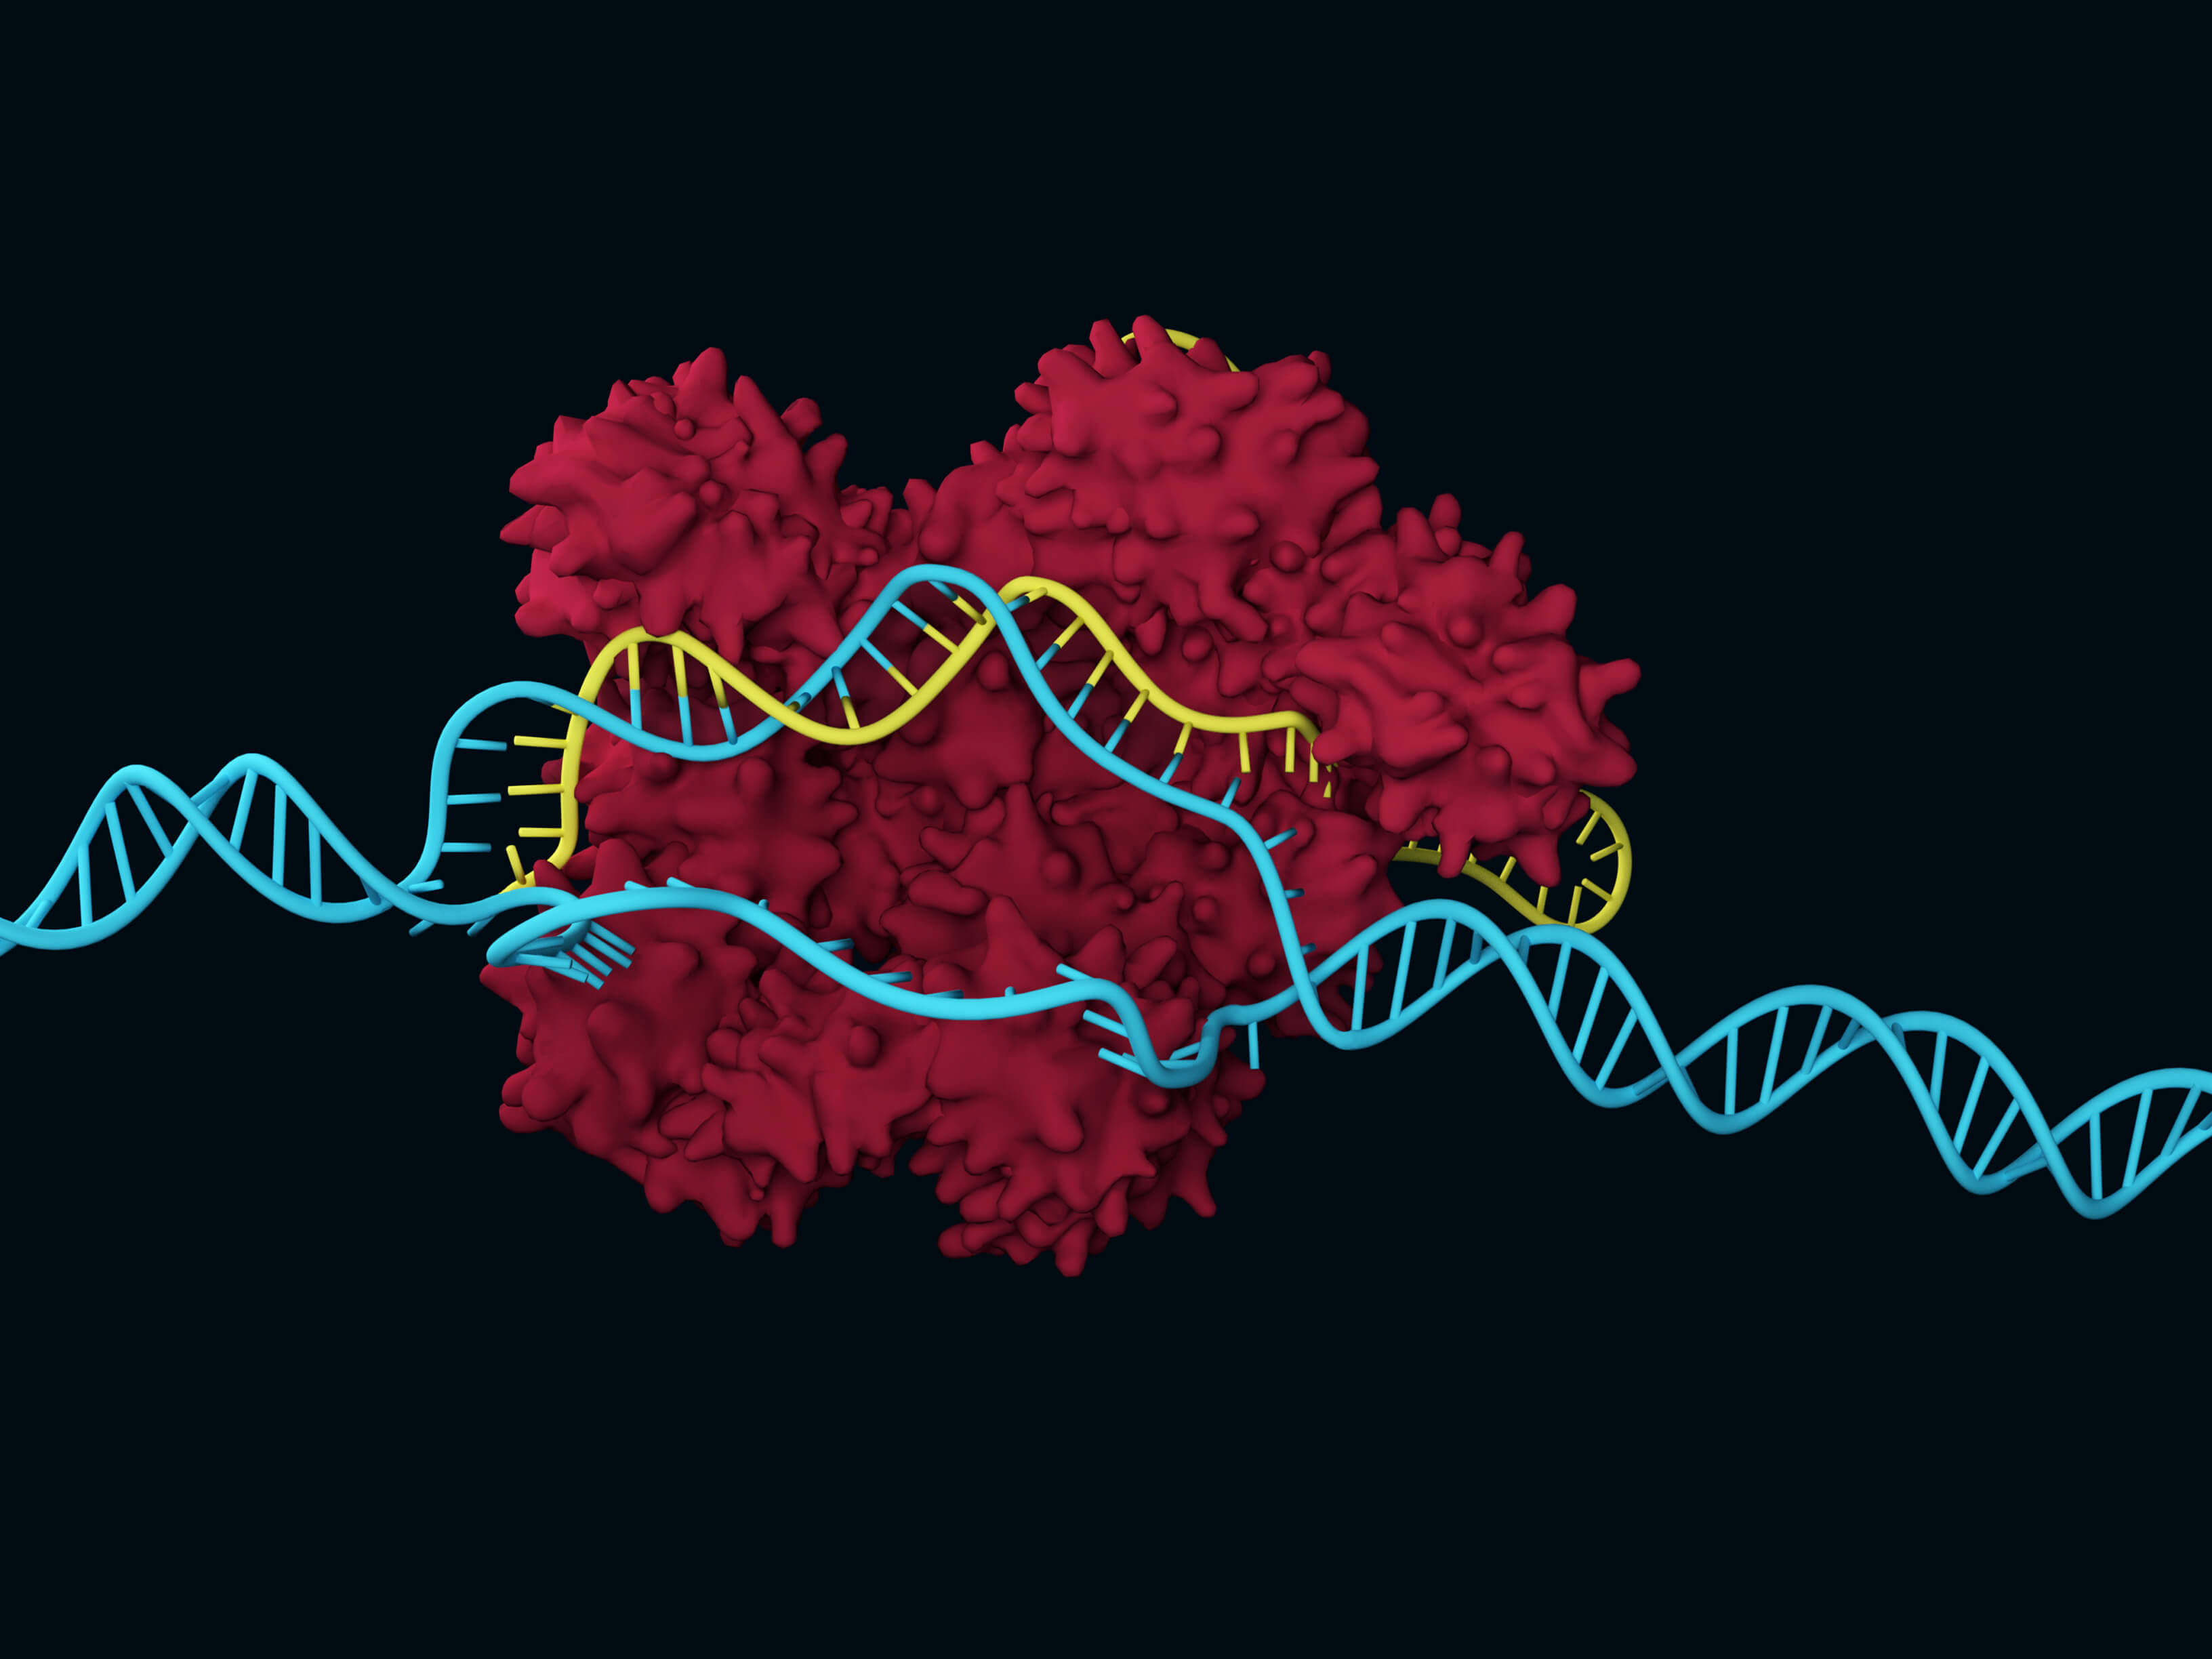 CRISPR and Twist DNA were used to speed up the discovery of covalent, antimicrobial drug targets